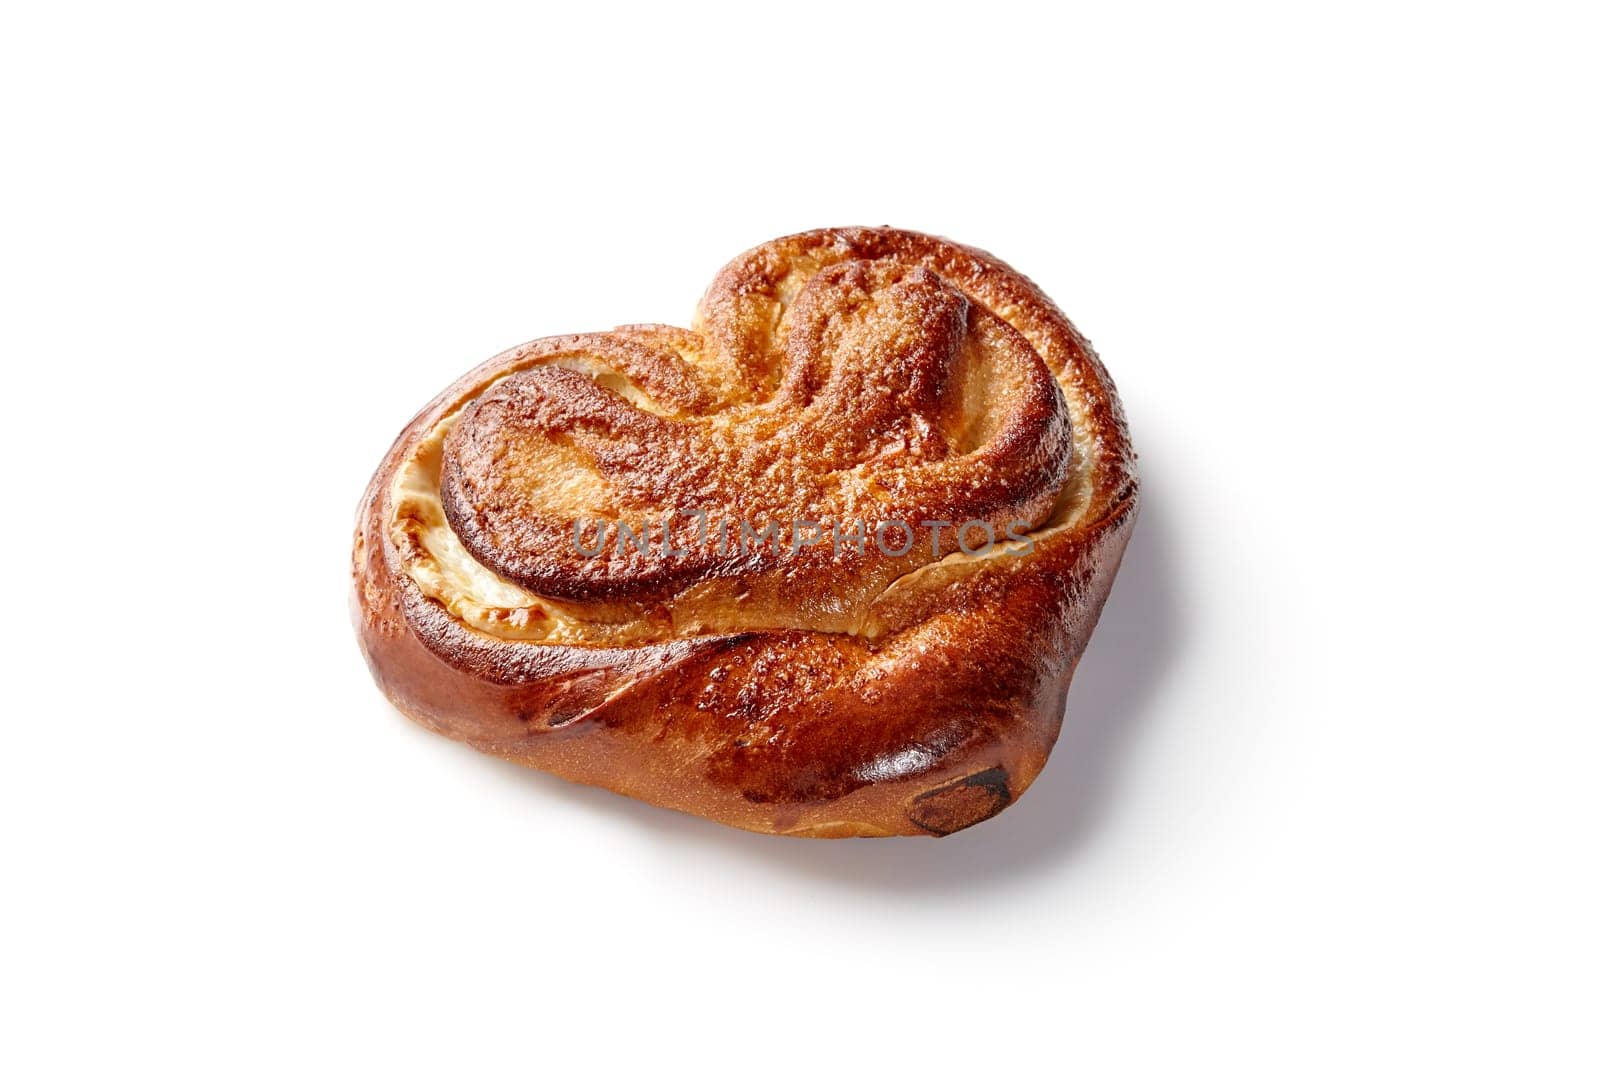 Fluffy golden sugar-dusted sweet bun filled with delicate custard, traditional Eastern European pastry, presented on white background